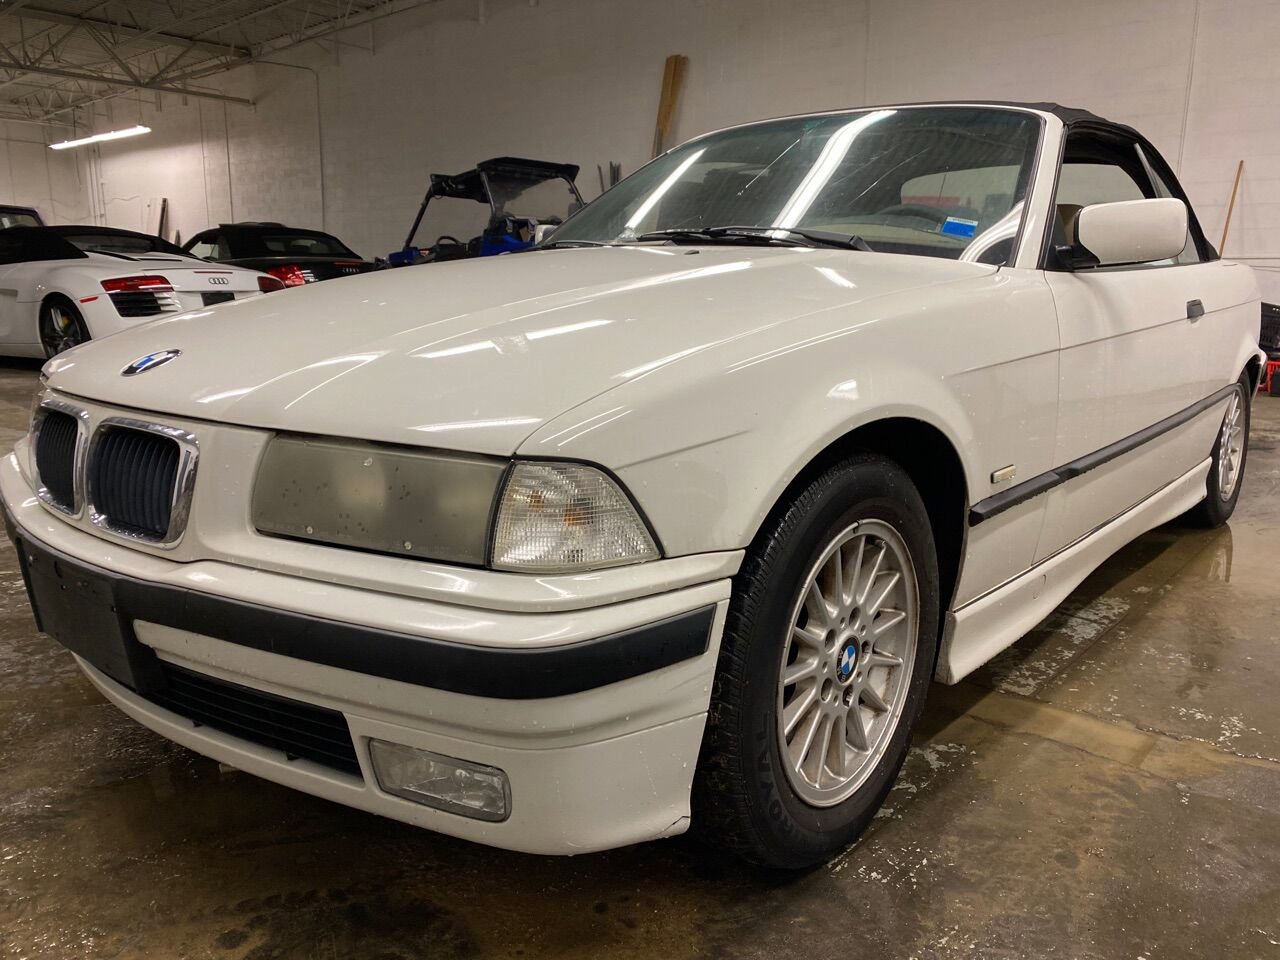 Used 1997 BMW 328i for Sale Right Now - Autotrader